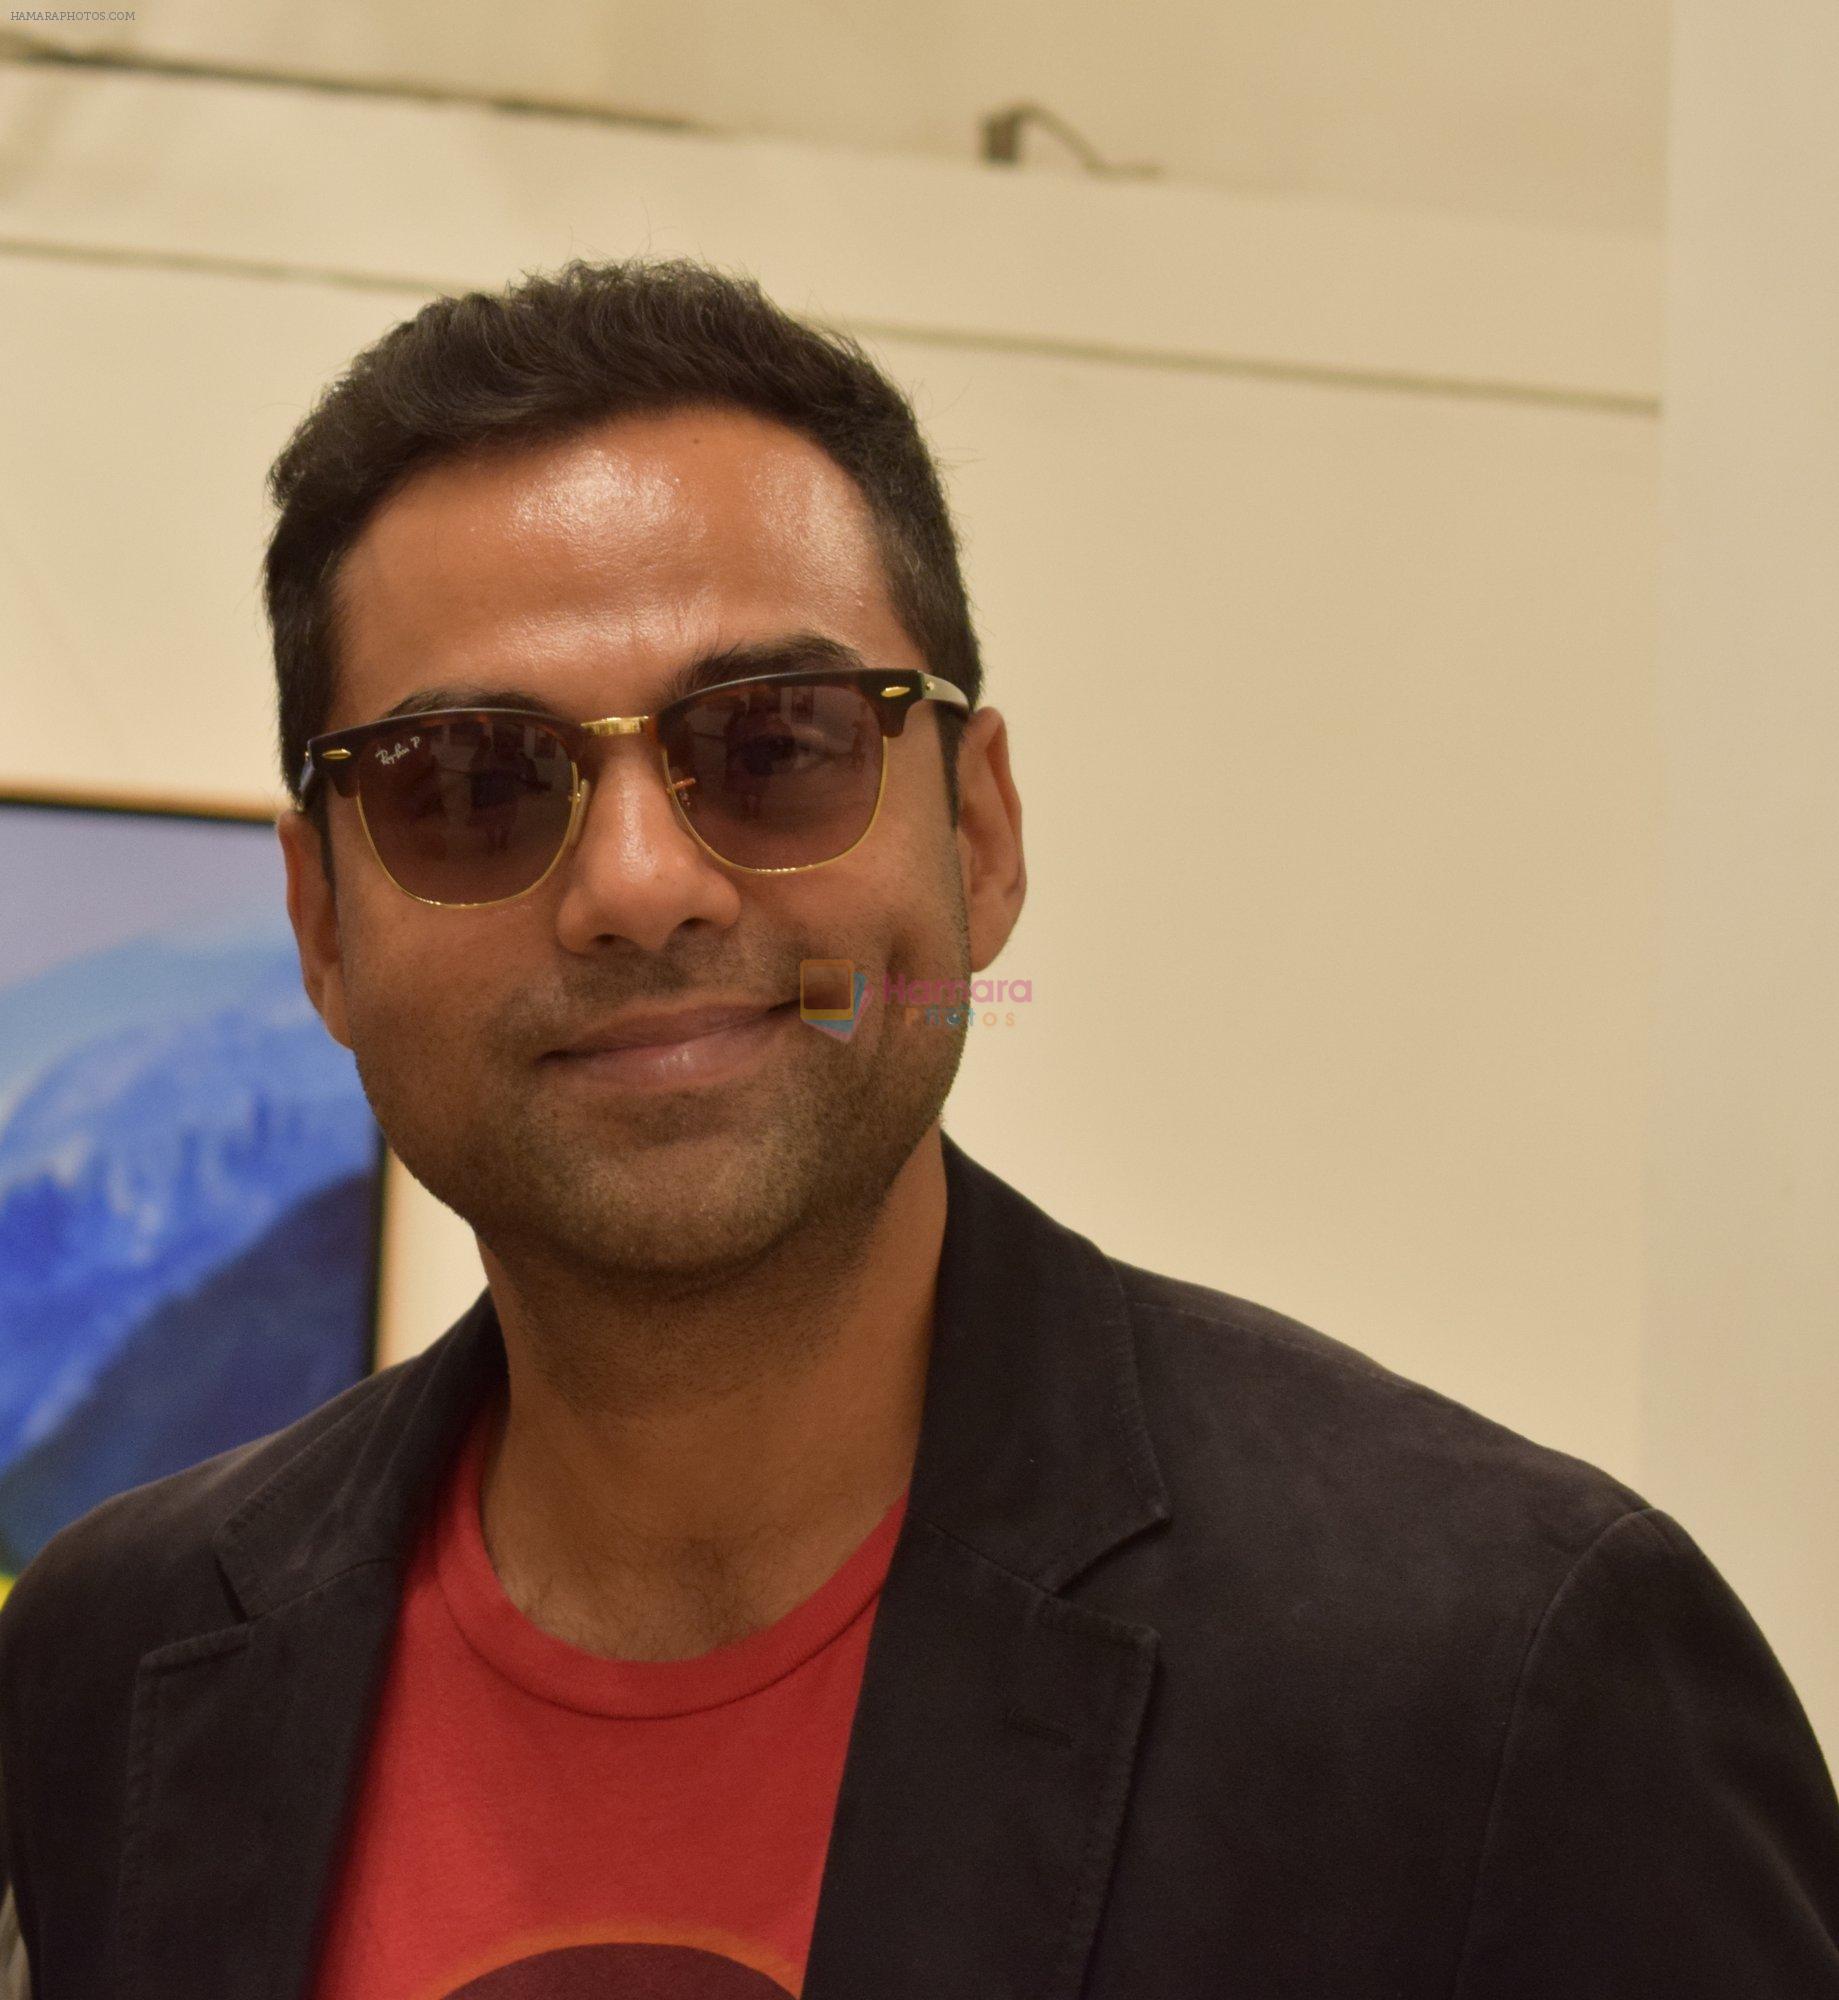 Abhay Deol at Manjula Chaturvedi art exhibition on 20th Sept 2016